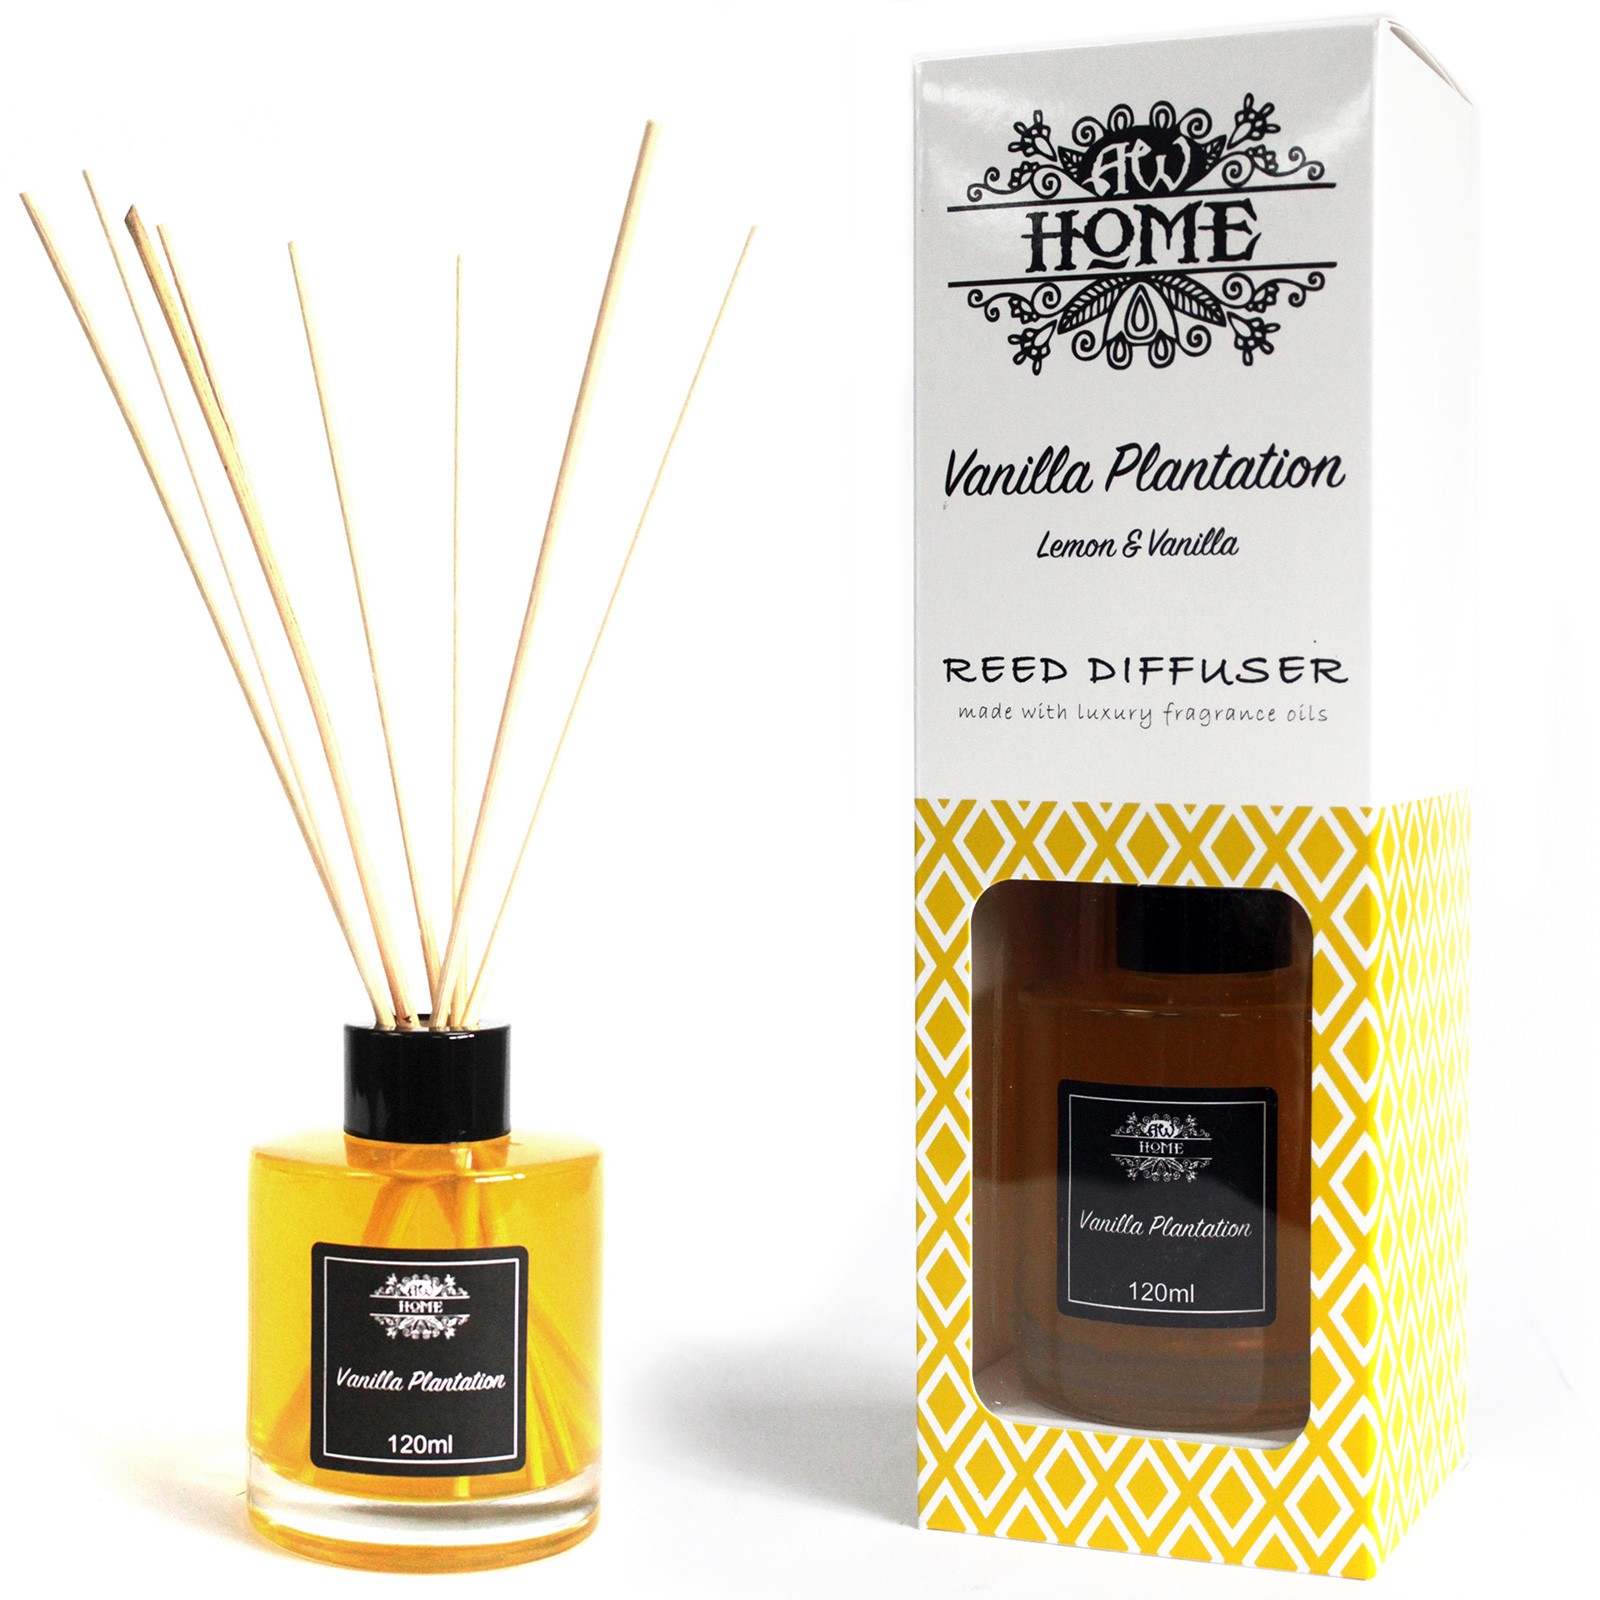 Vanilla Plantation - Home Fragrance Reed Diffuser - 120ml With Reeds